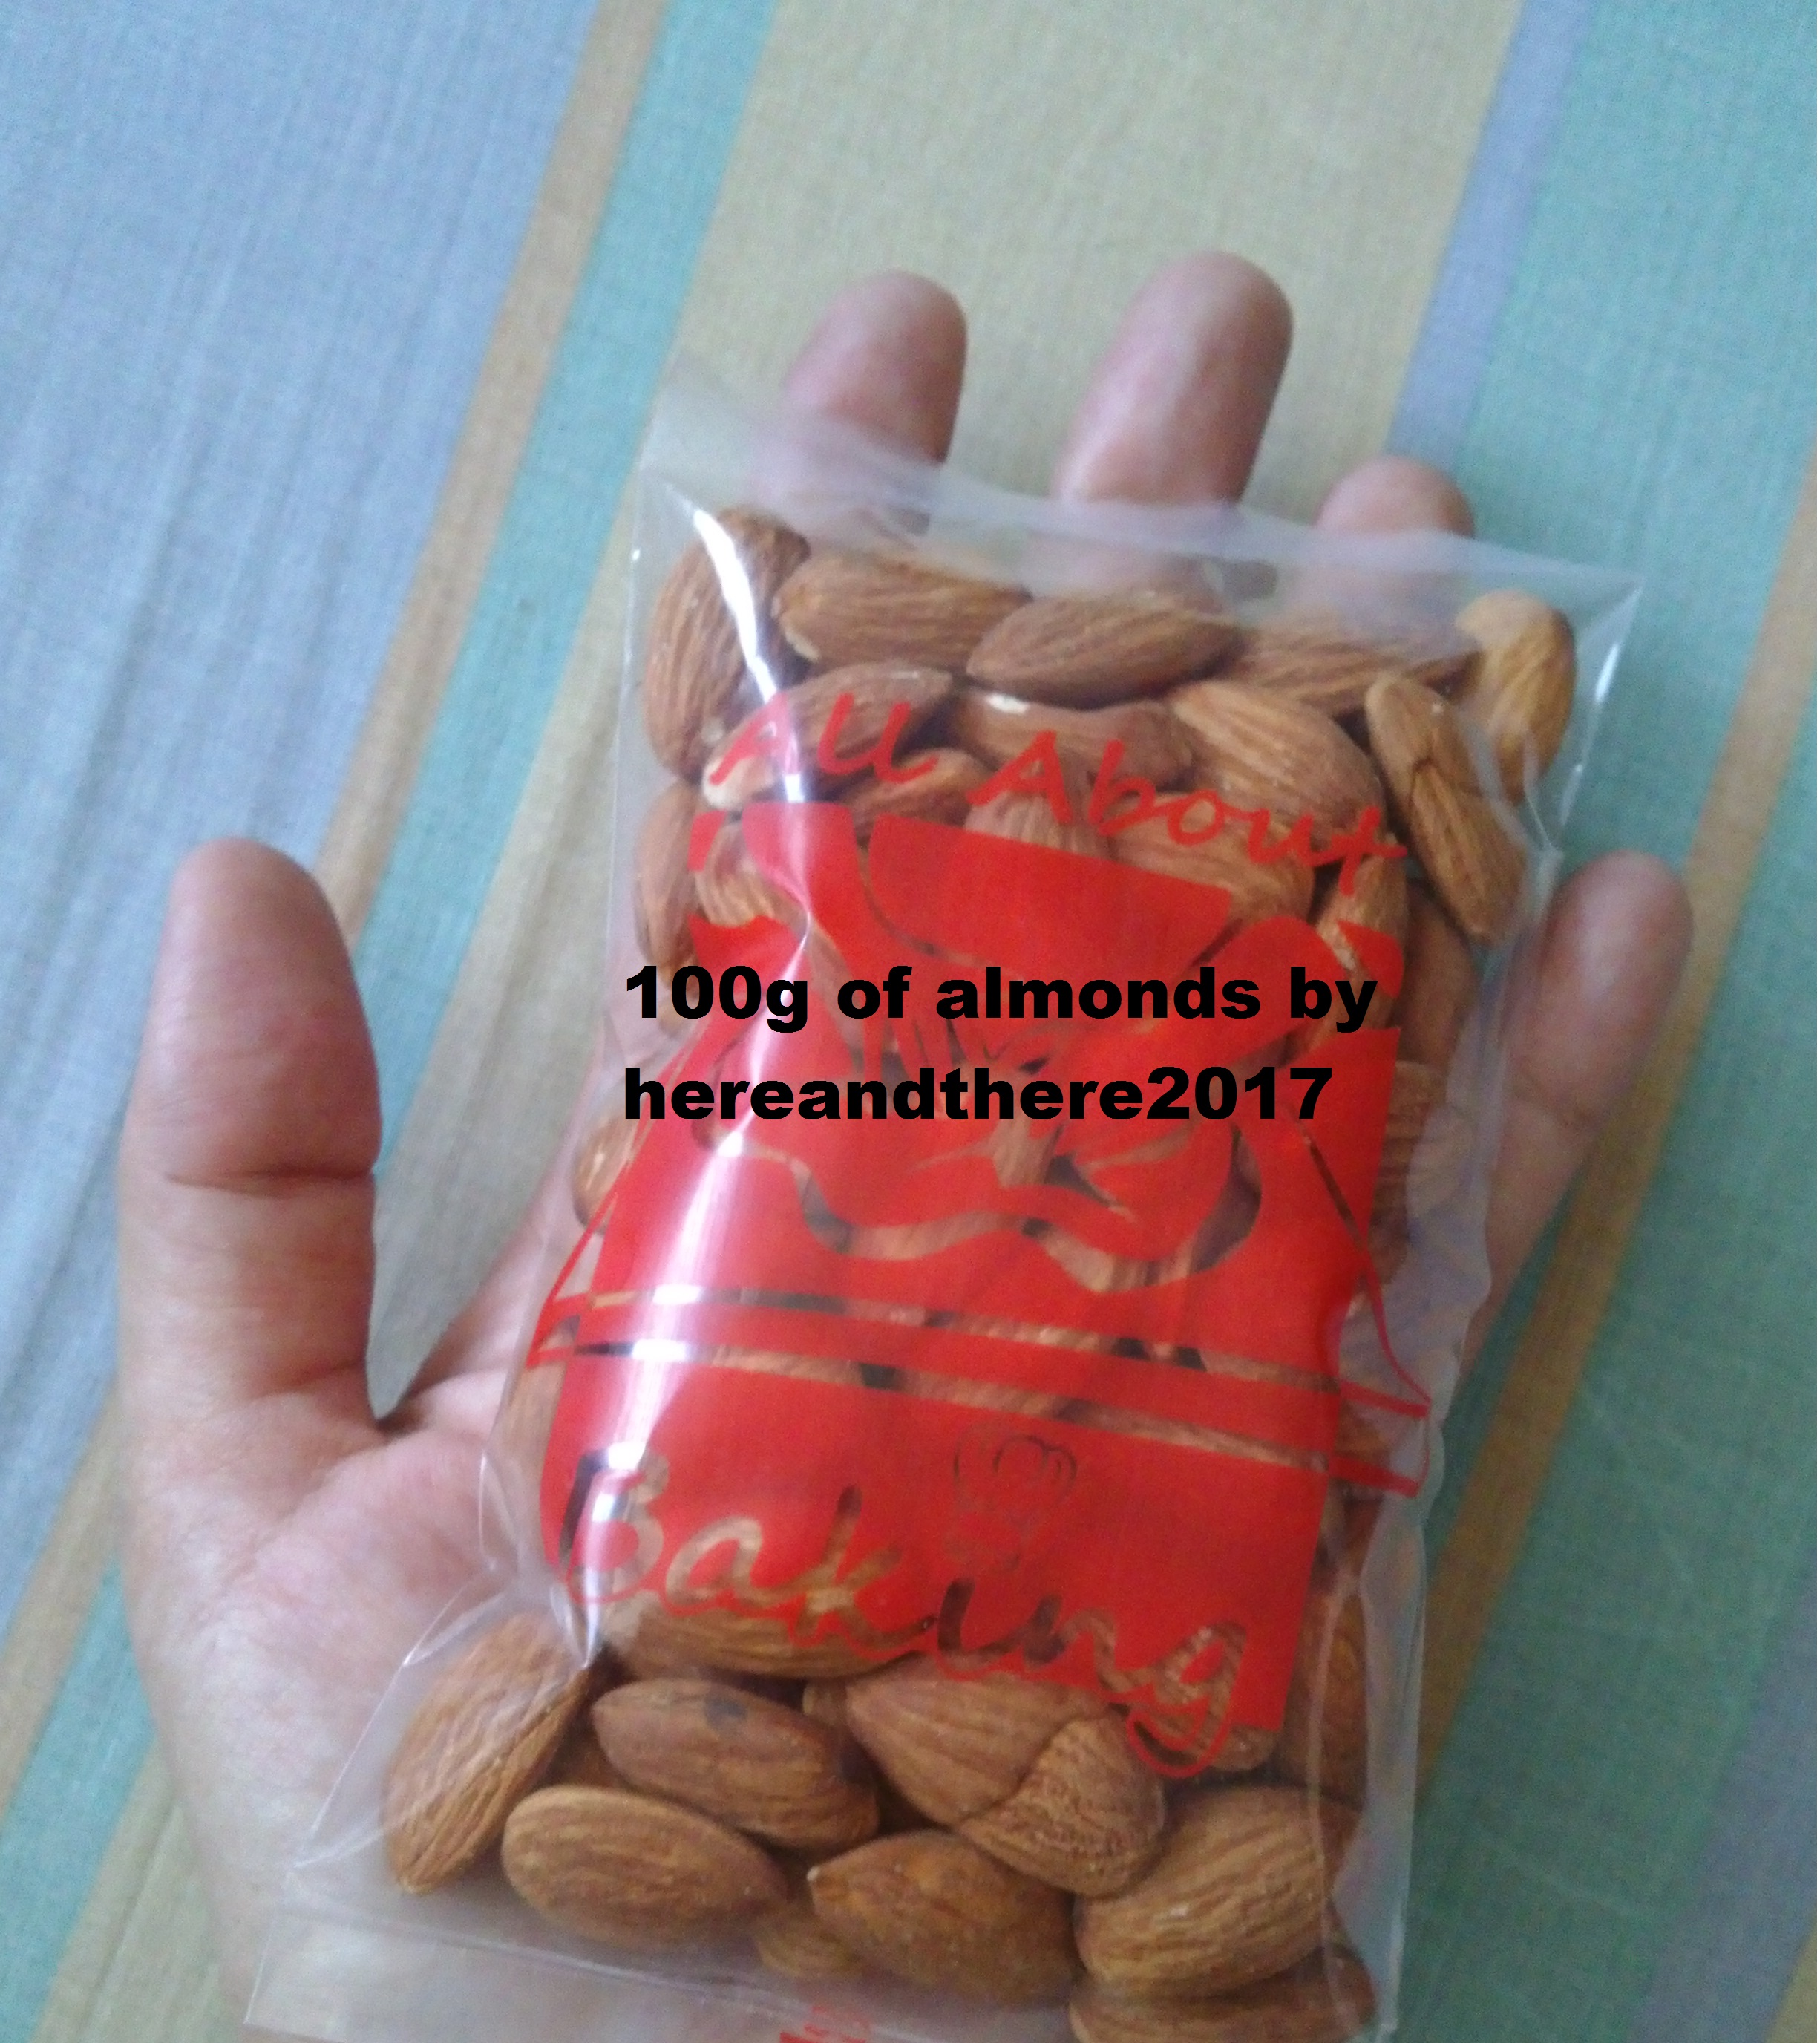 100g of almonds by hereandthere2017